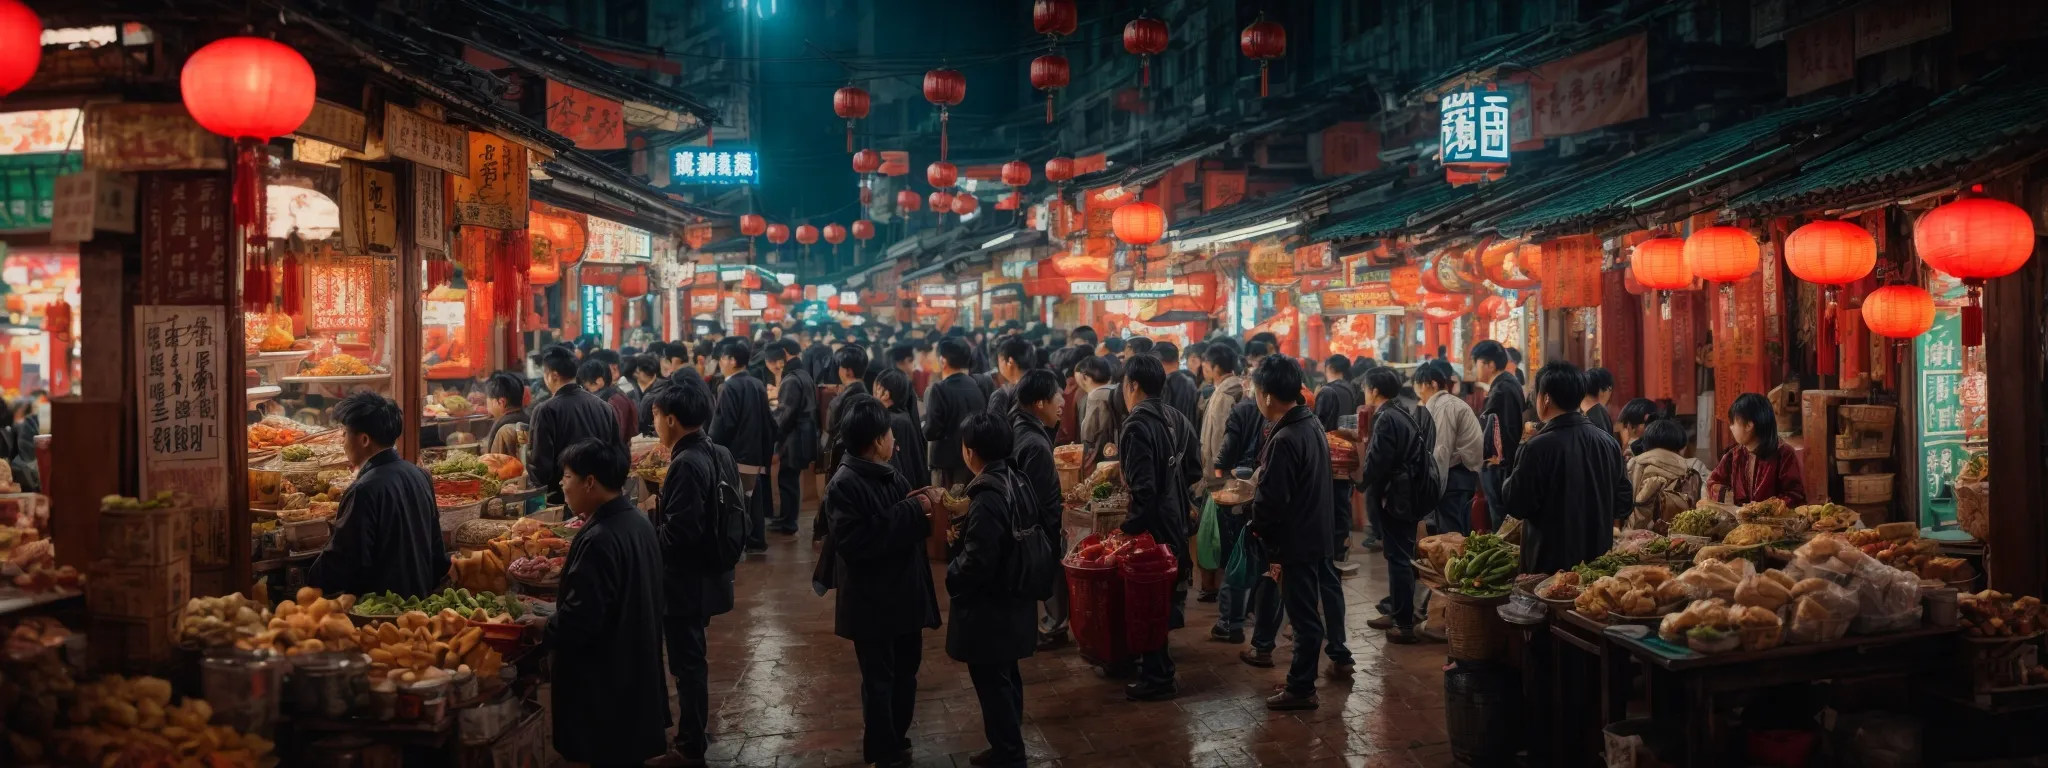 a bustling chinese marketplace scene bustling with activity and swift transactions under the neon glow of signs.